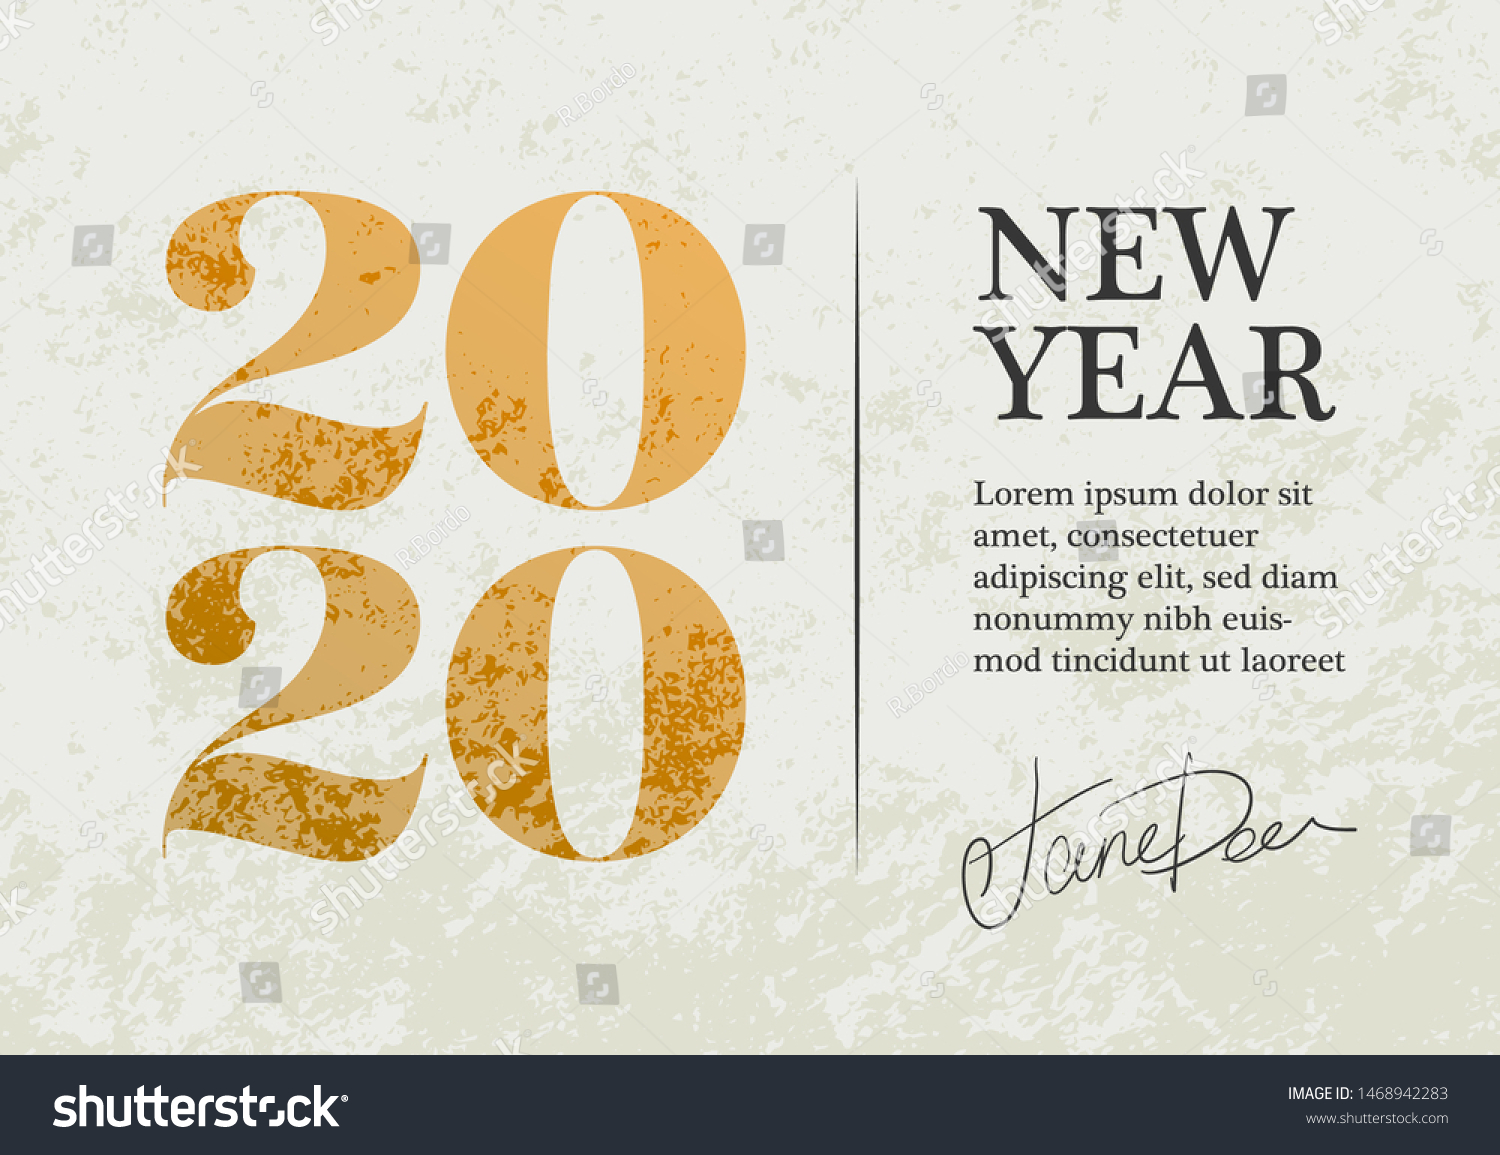 New Year 2020 Greeting Card Design Stock Vector Royalty Free 1468942283